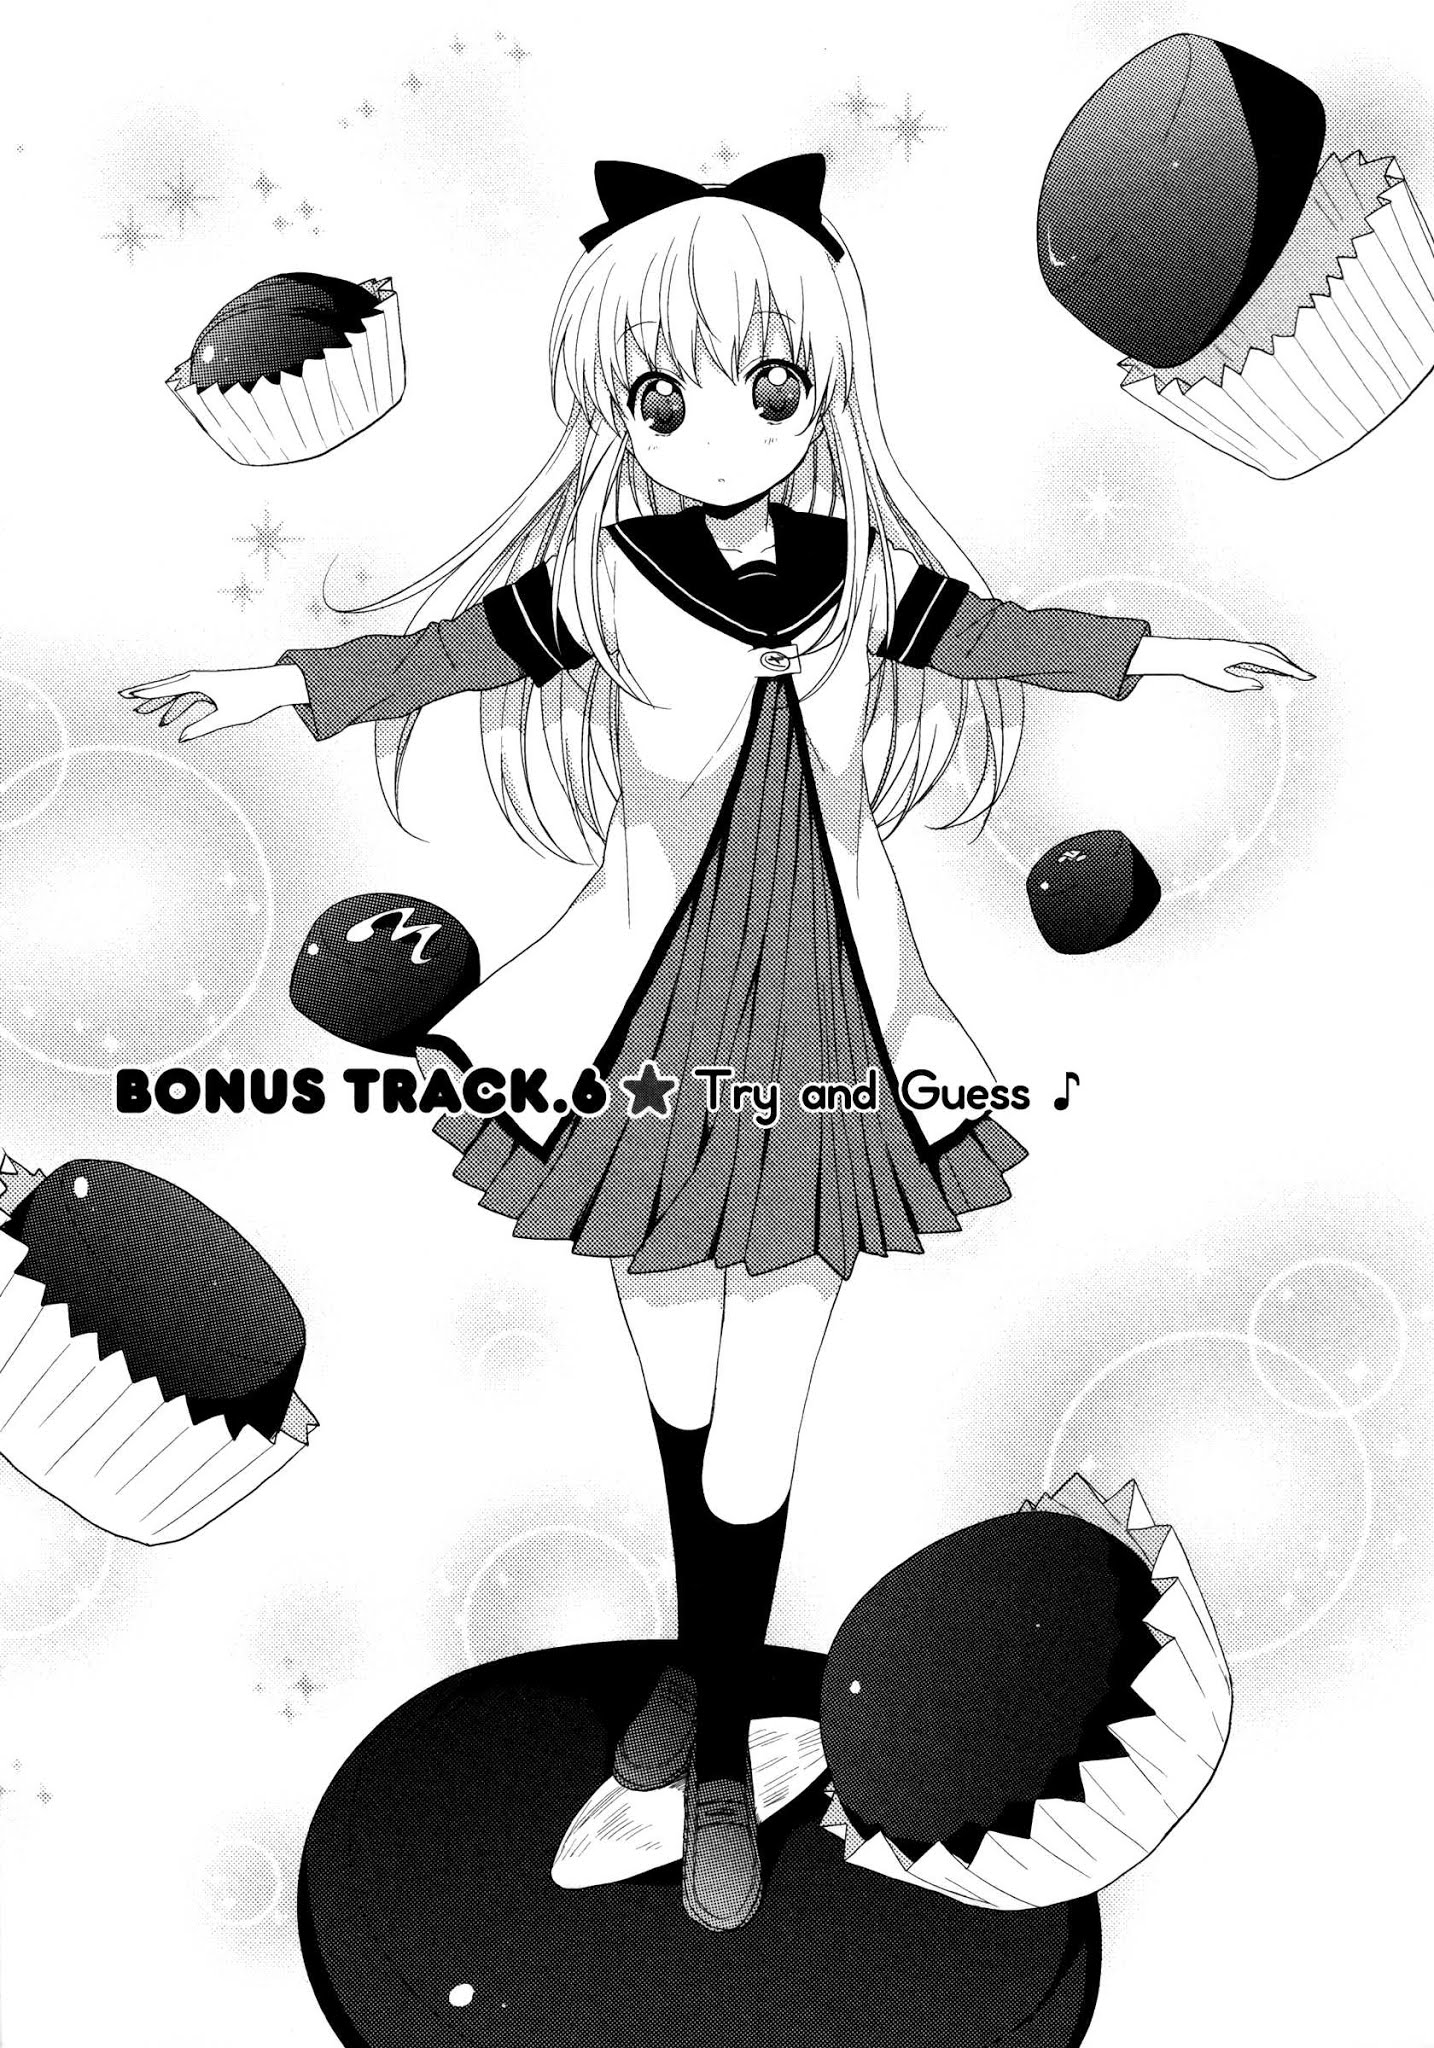 Yuru Yuri Chapter 32.5: Bonus Track 6 - Try And Guess ♪ - Picture 1